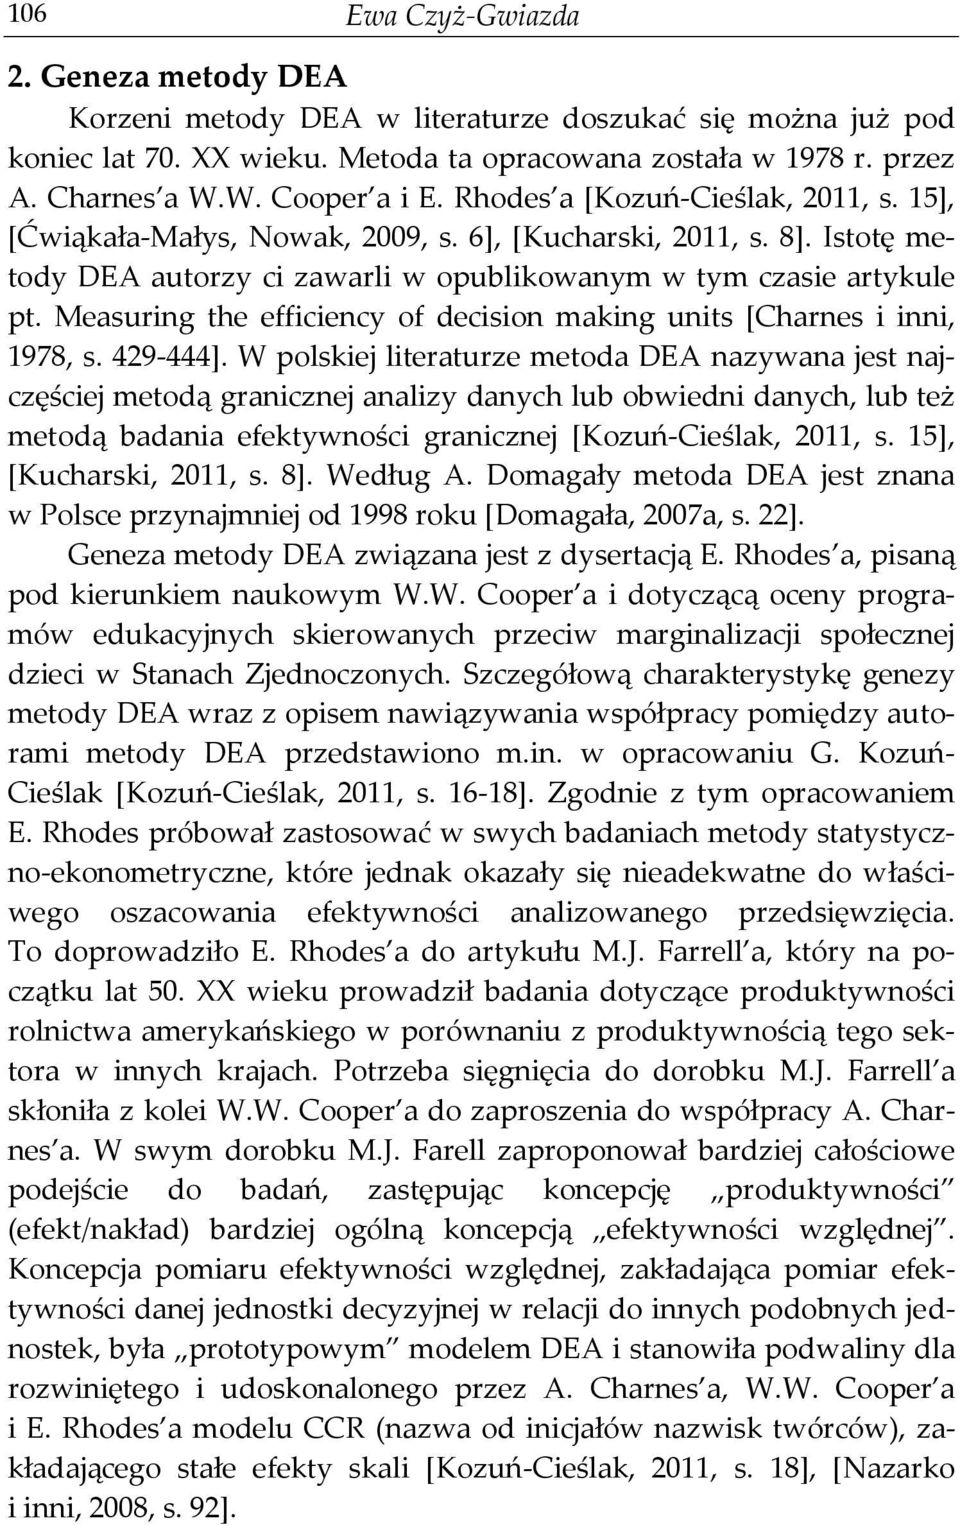 Measuring the efficiency of decision making units [Charnes i inni, 1978, s. 429-444].